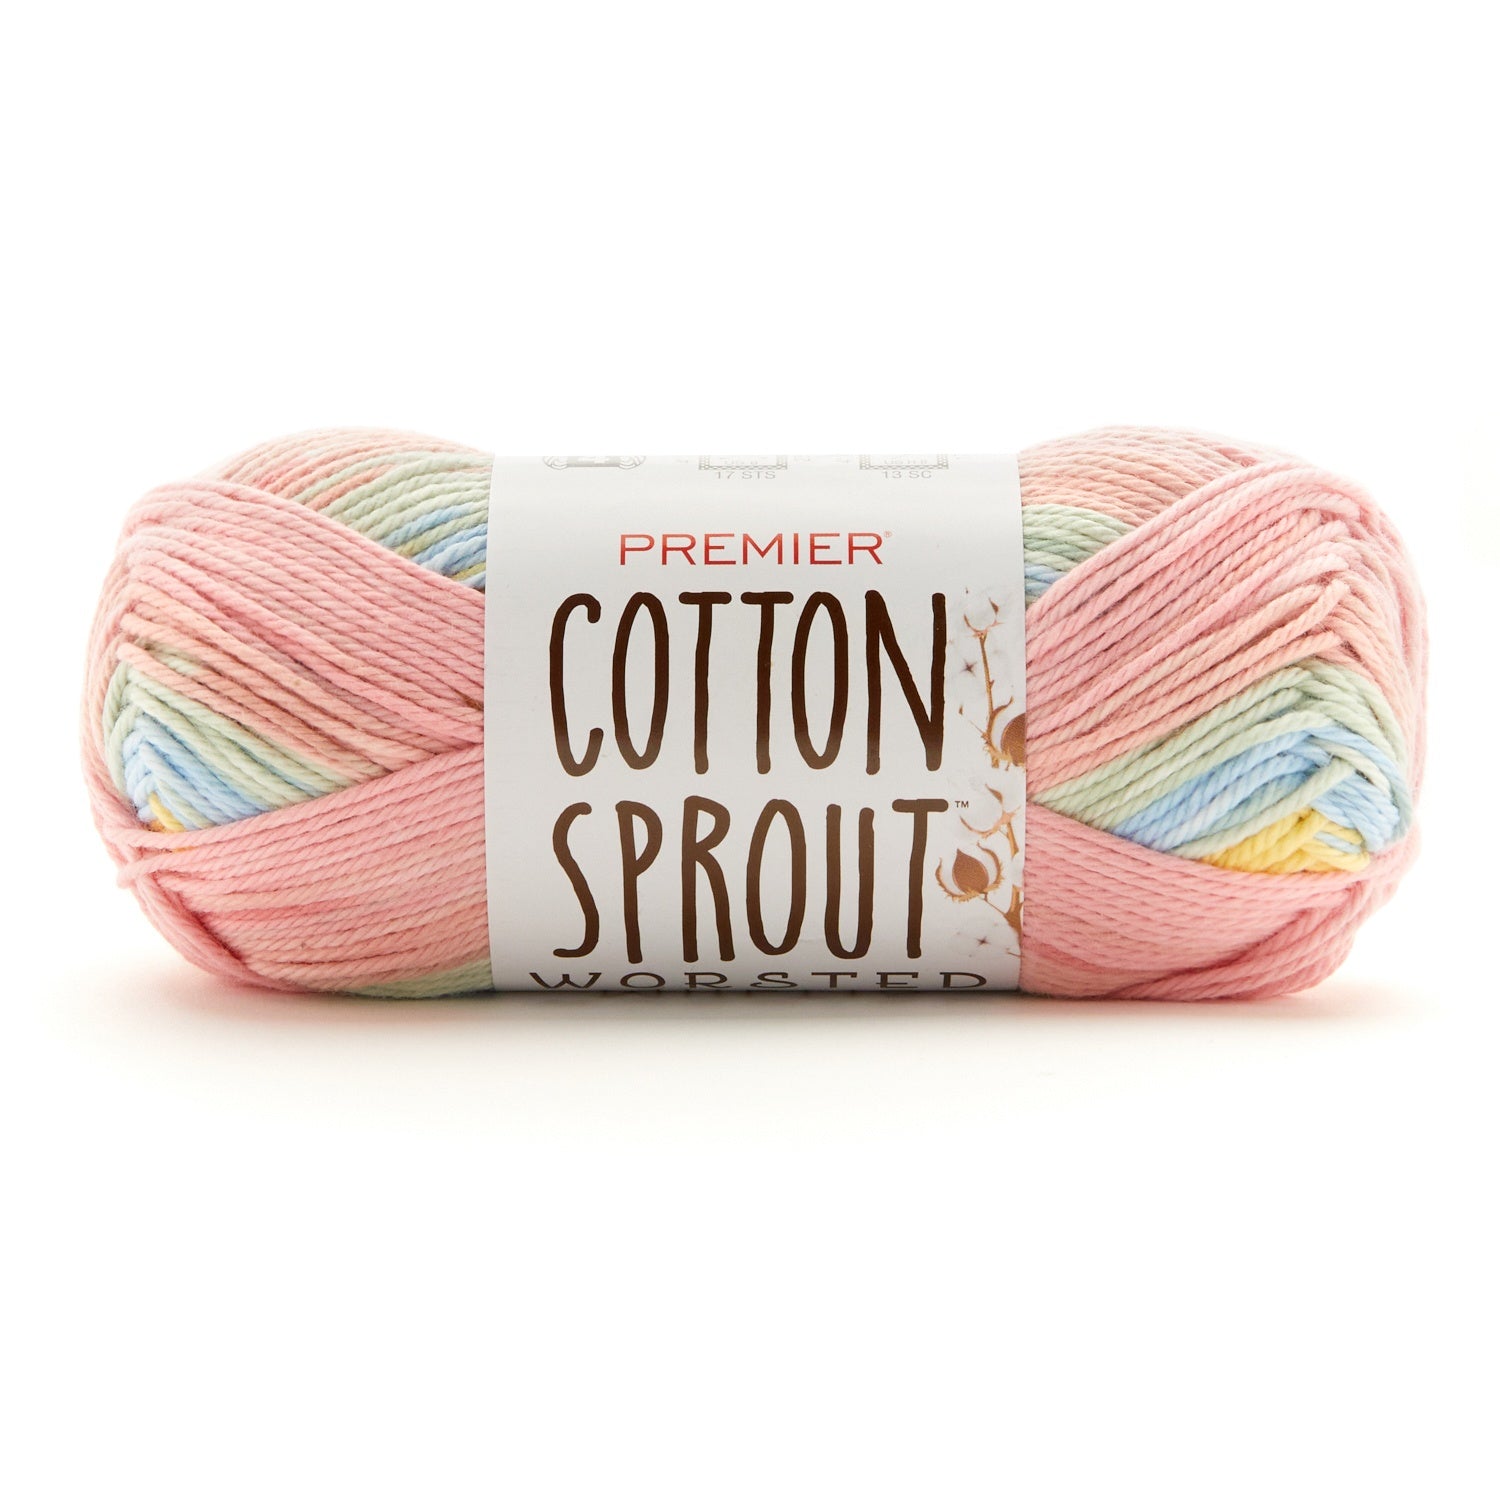 Premier cotton sprout worsted multi yarn - 8